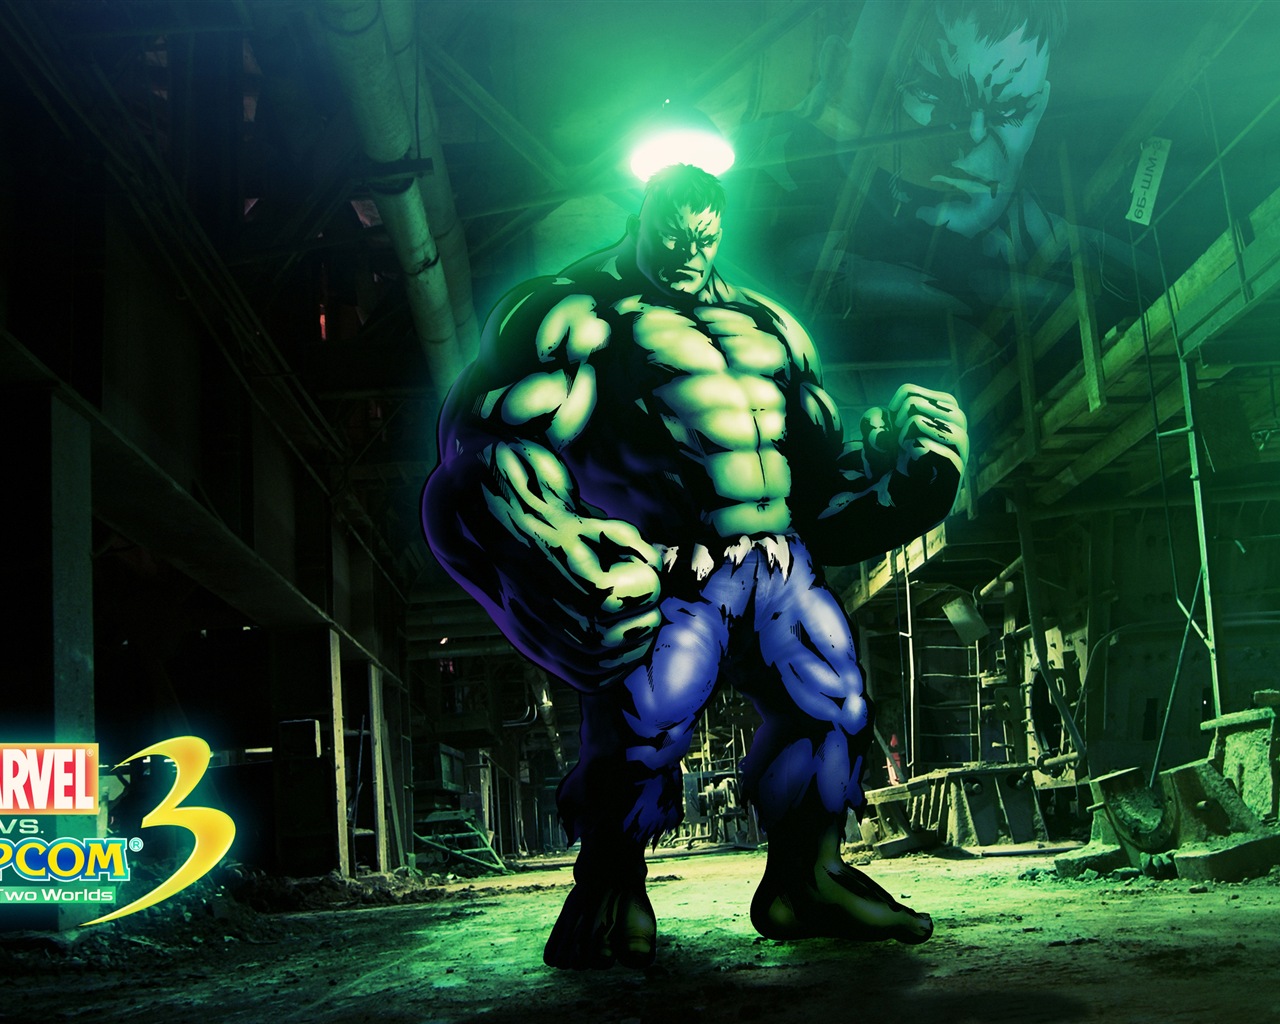 Marvel VS. Capcom 3: Fate of Two Worlds HD game wallpapers #11 - 1280x1024